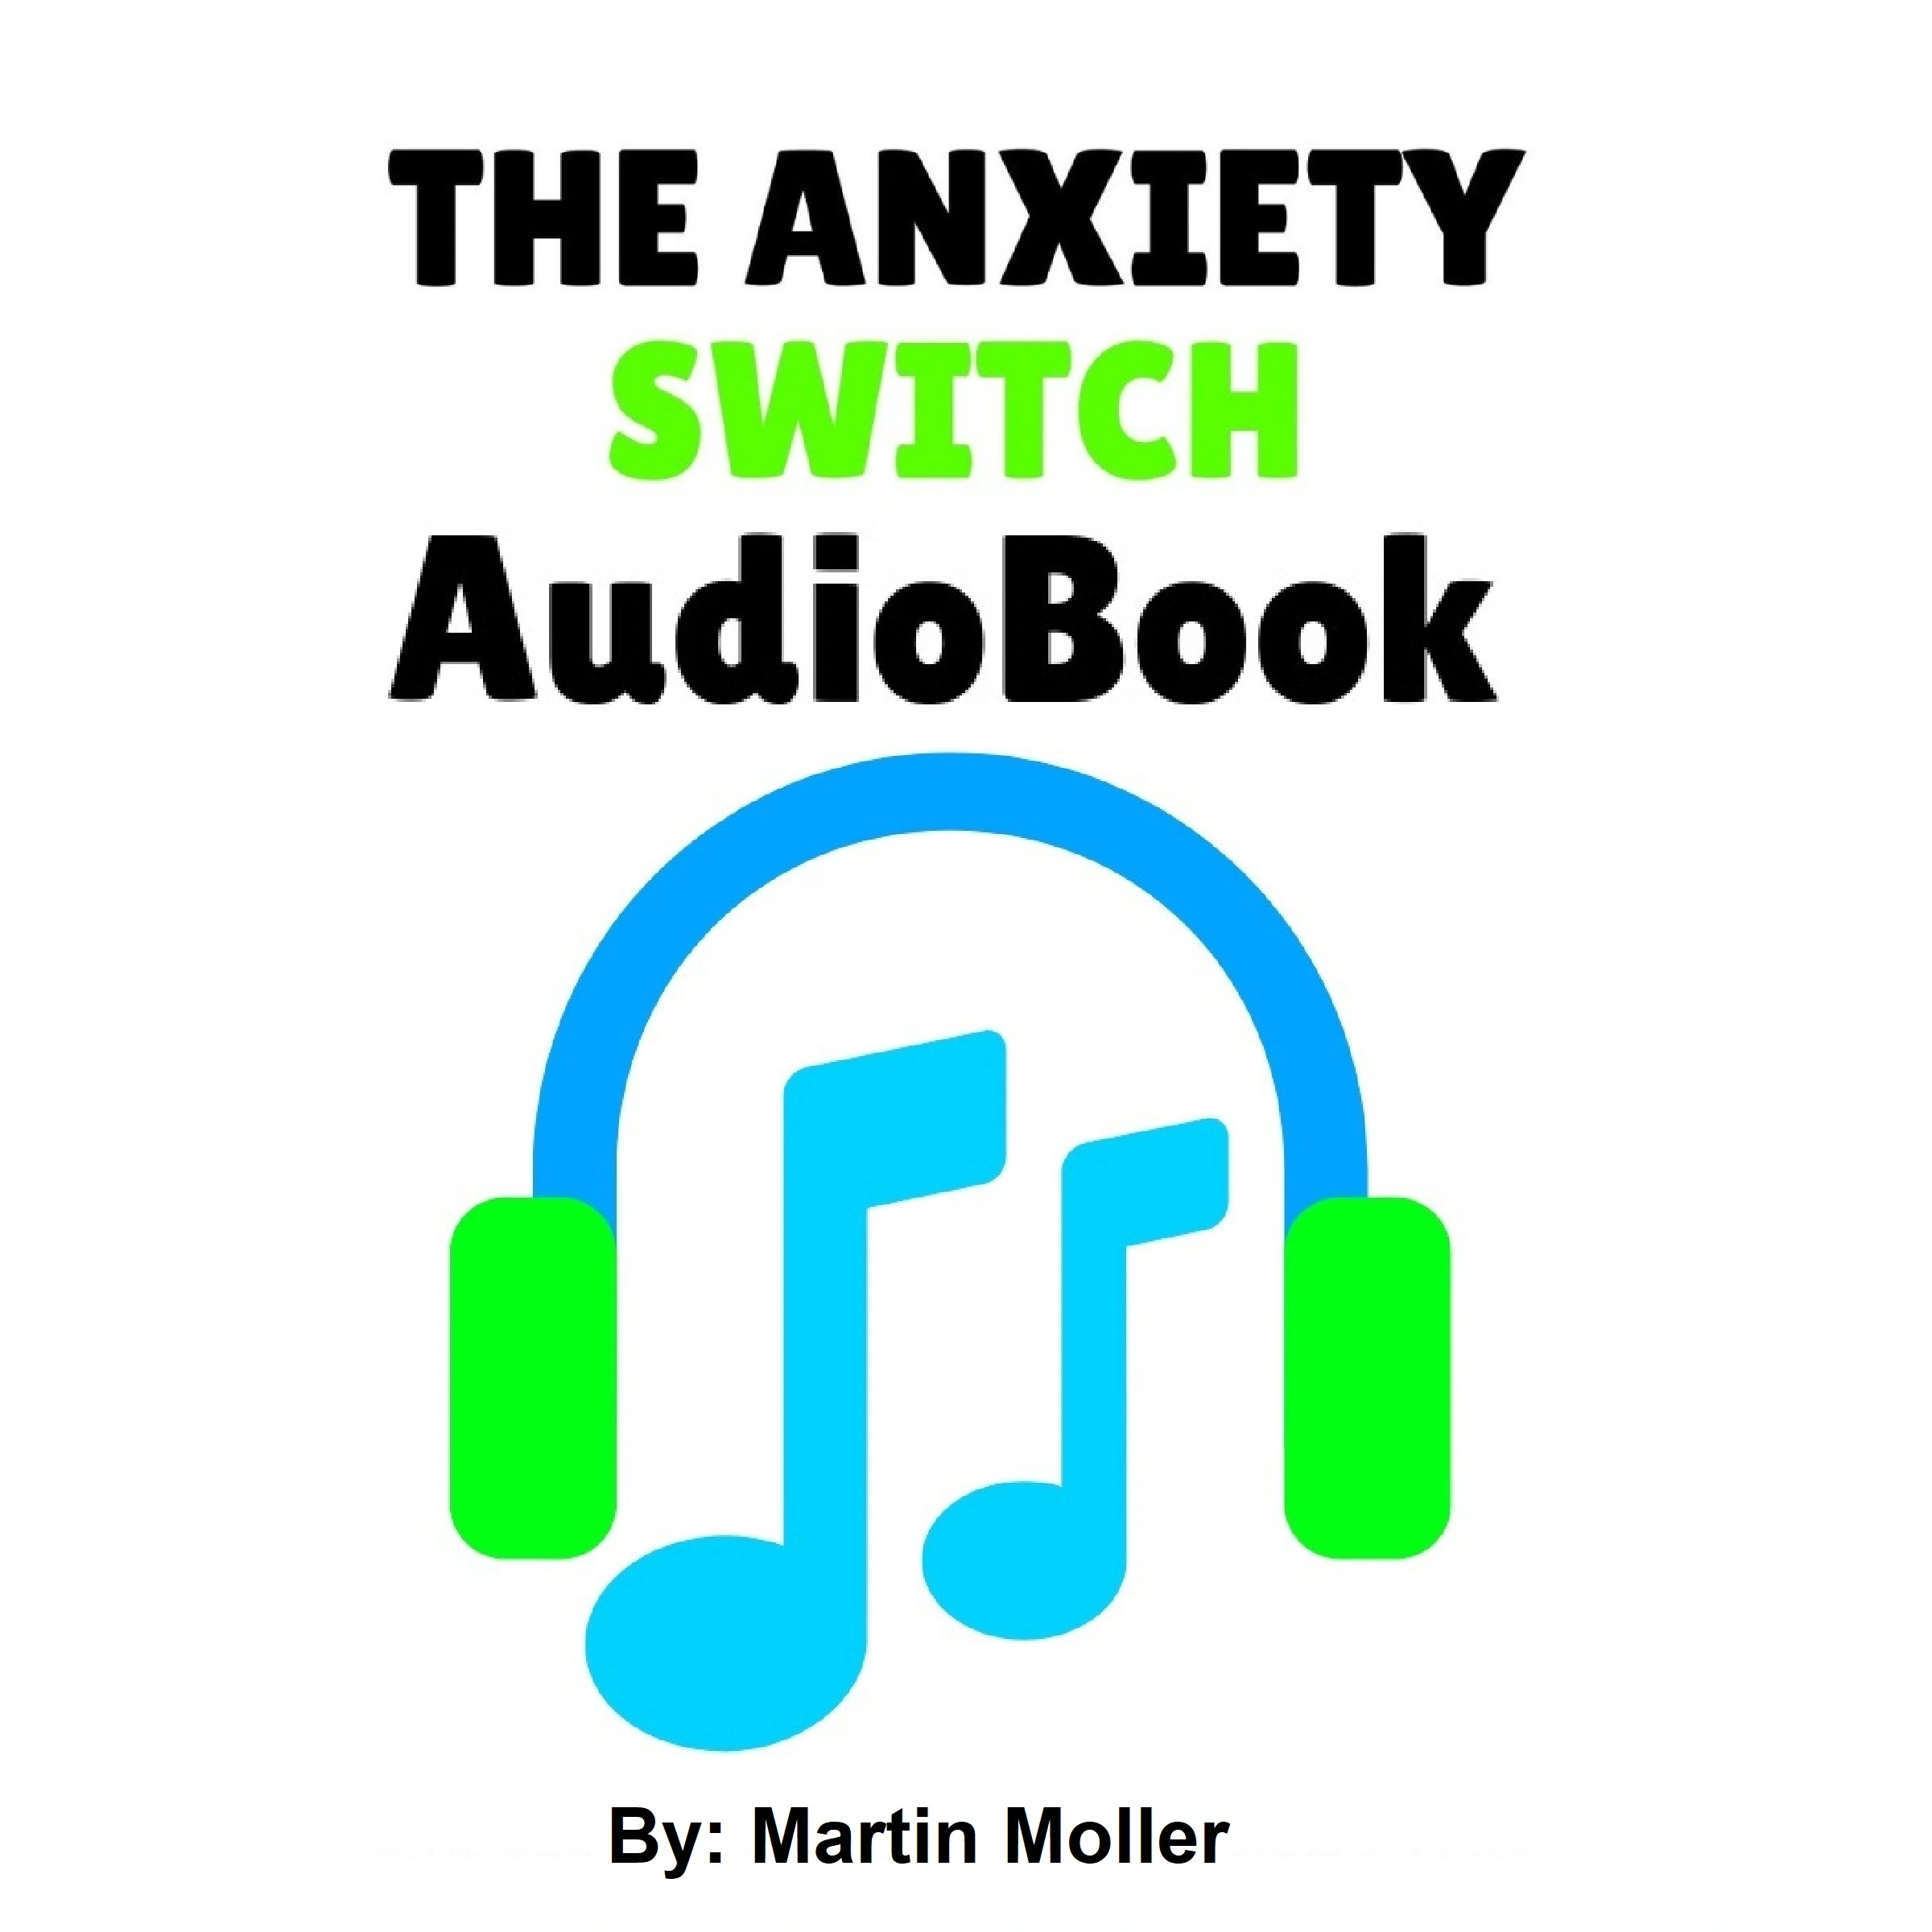 The Anxiety Switch Audiobook by Martin Moller